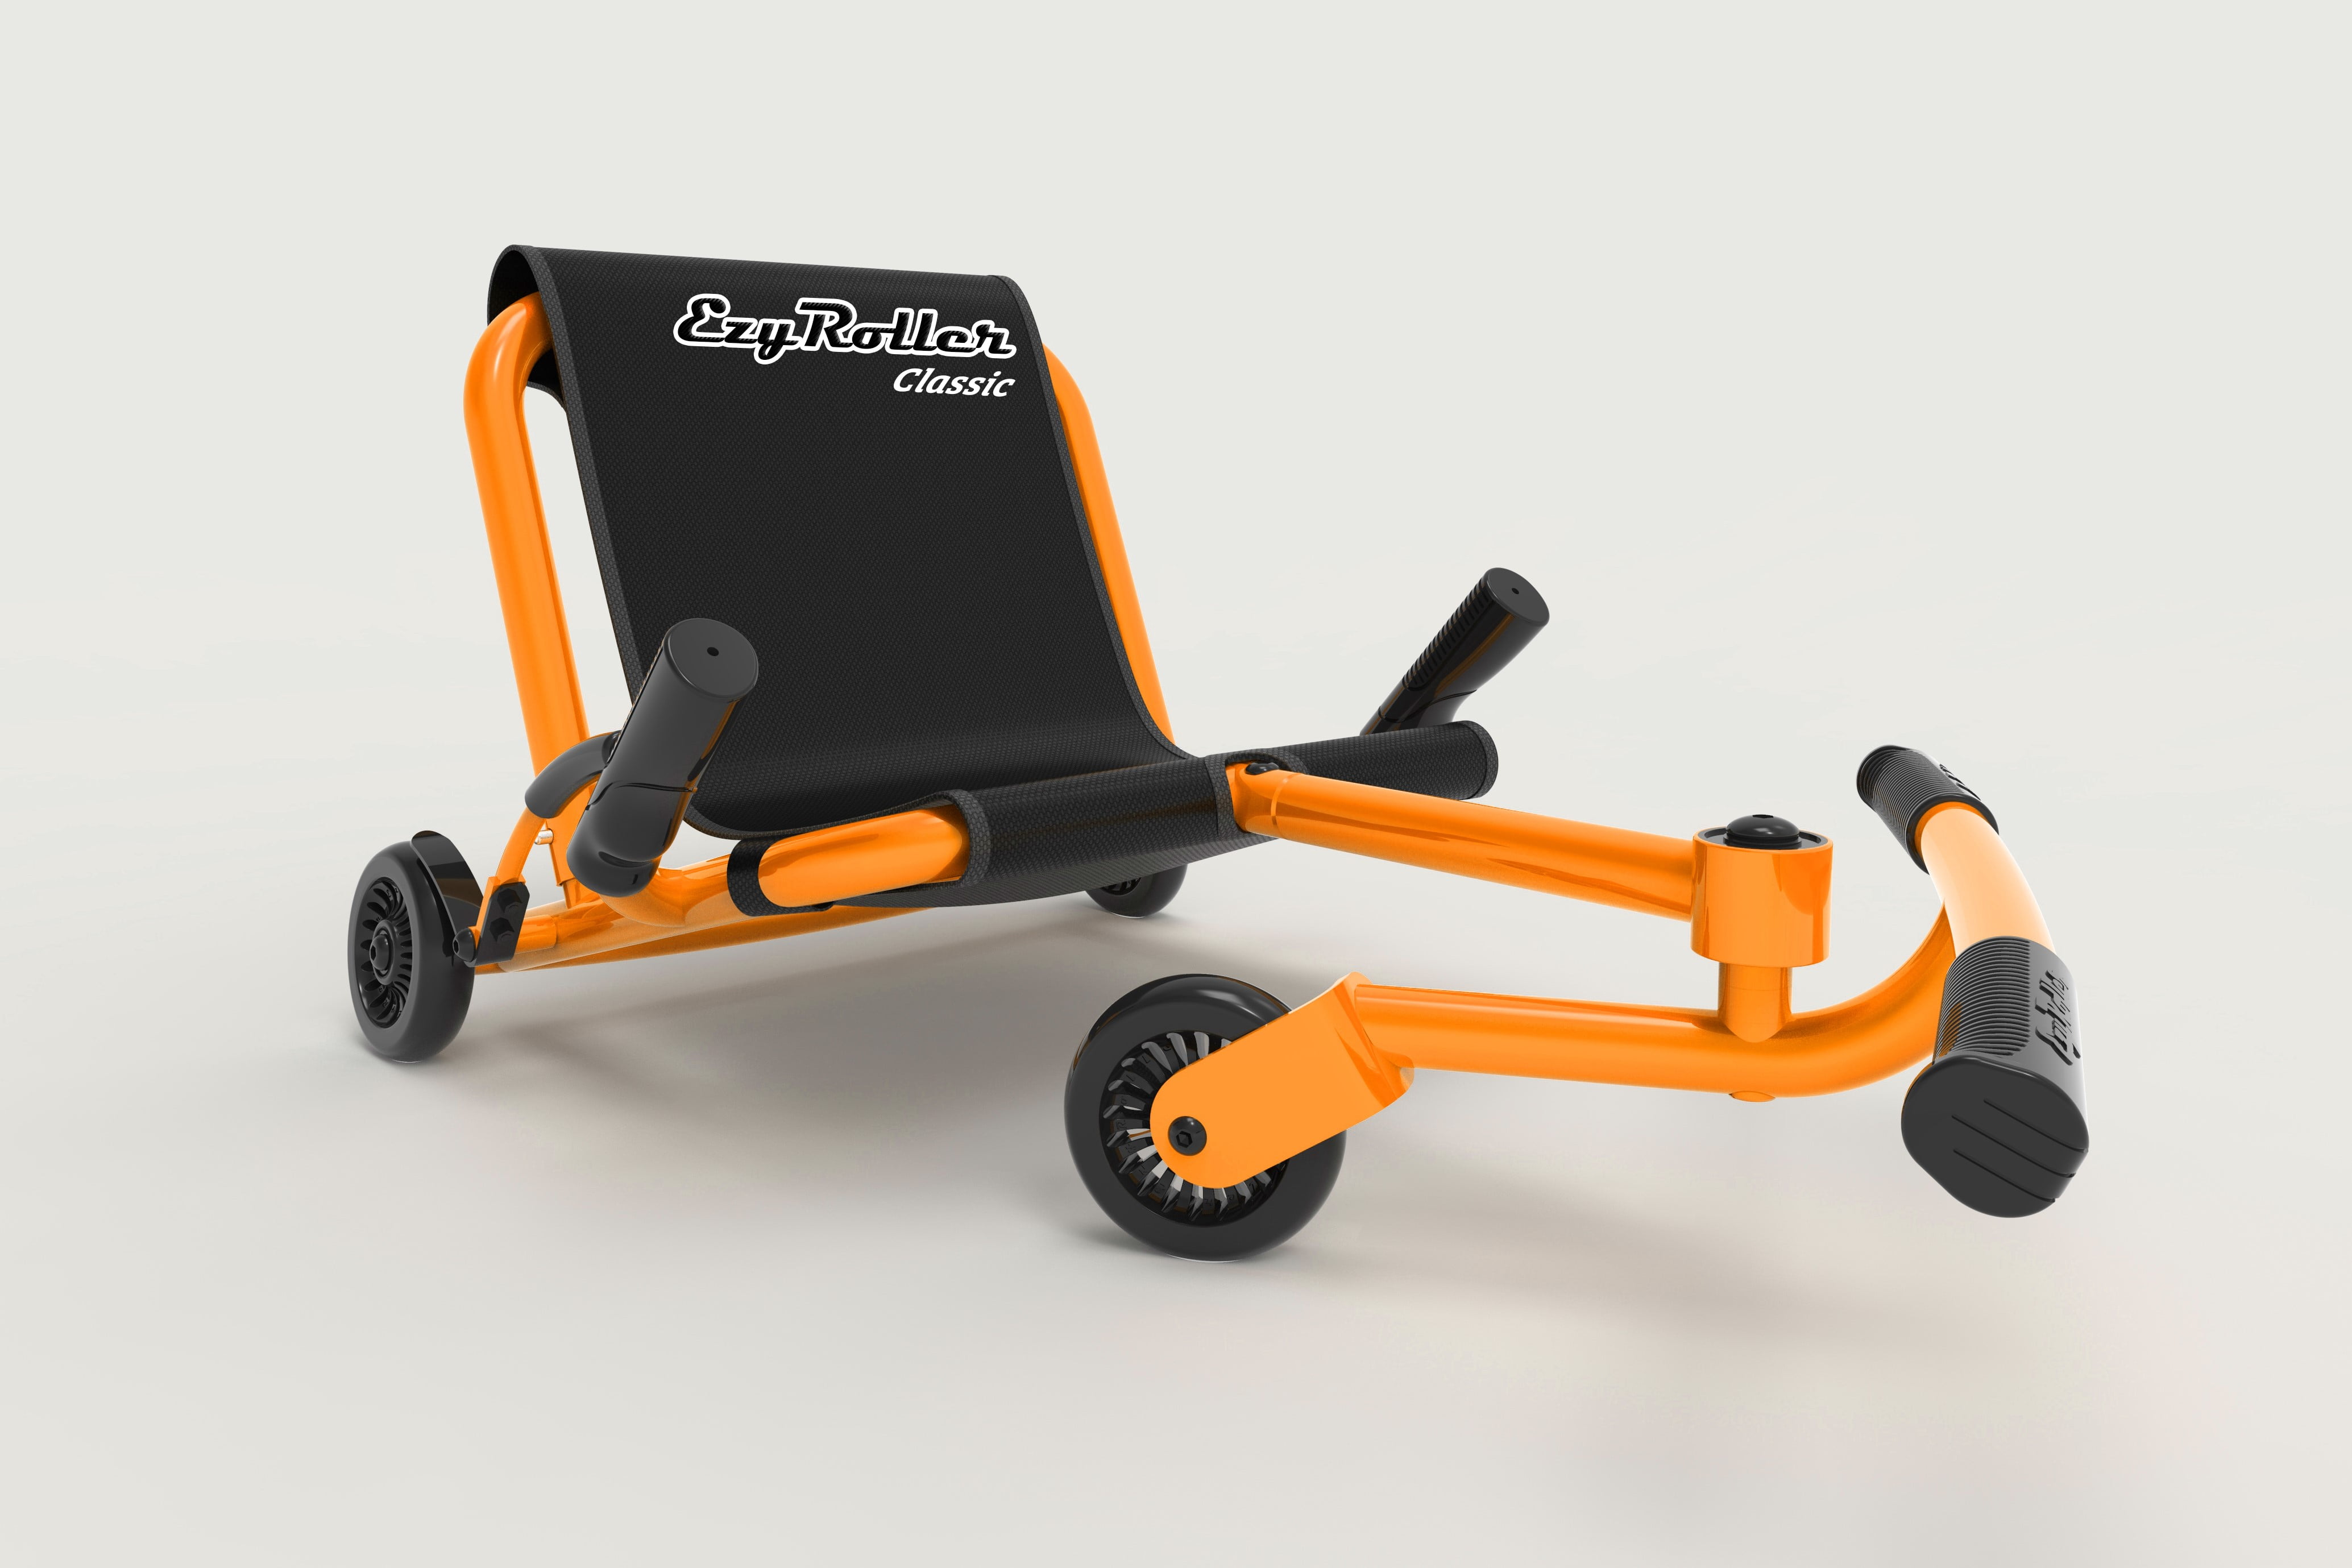 Toy Review: Ezy Roller, the ultimate riding machine, debuts in